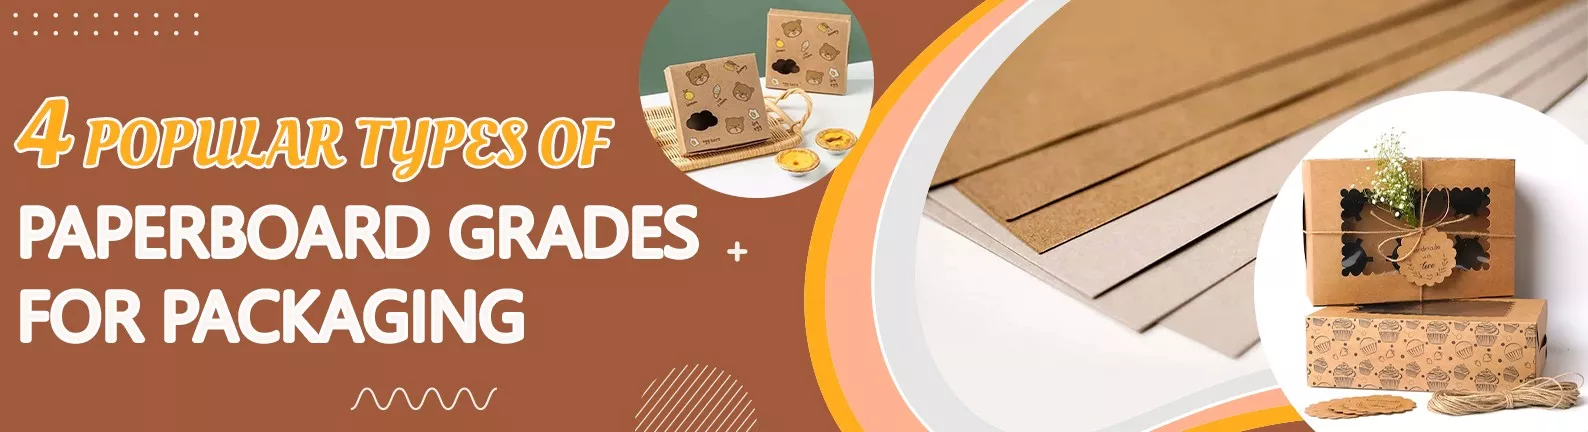 4 Popular Types of Paperboard Grades For Packaging